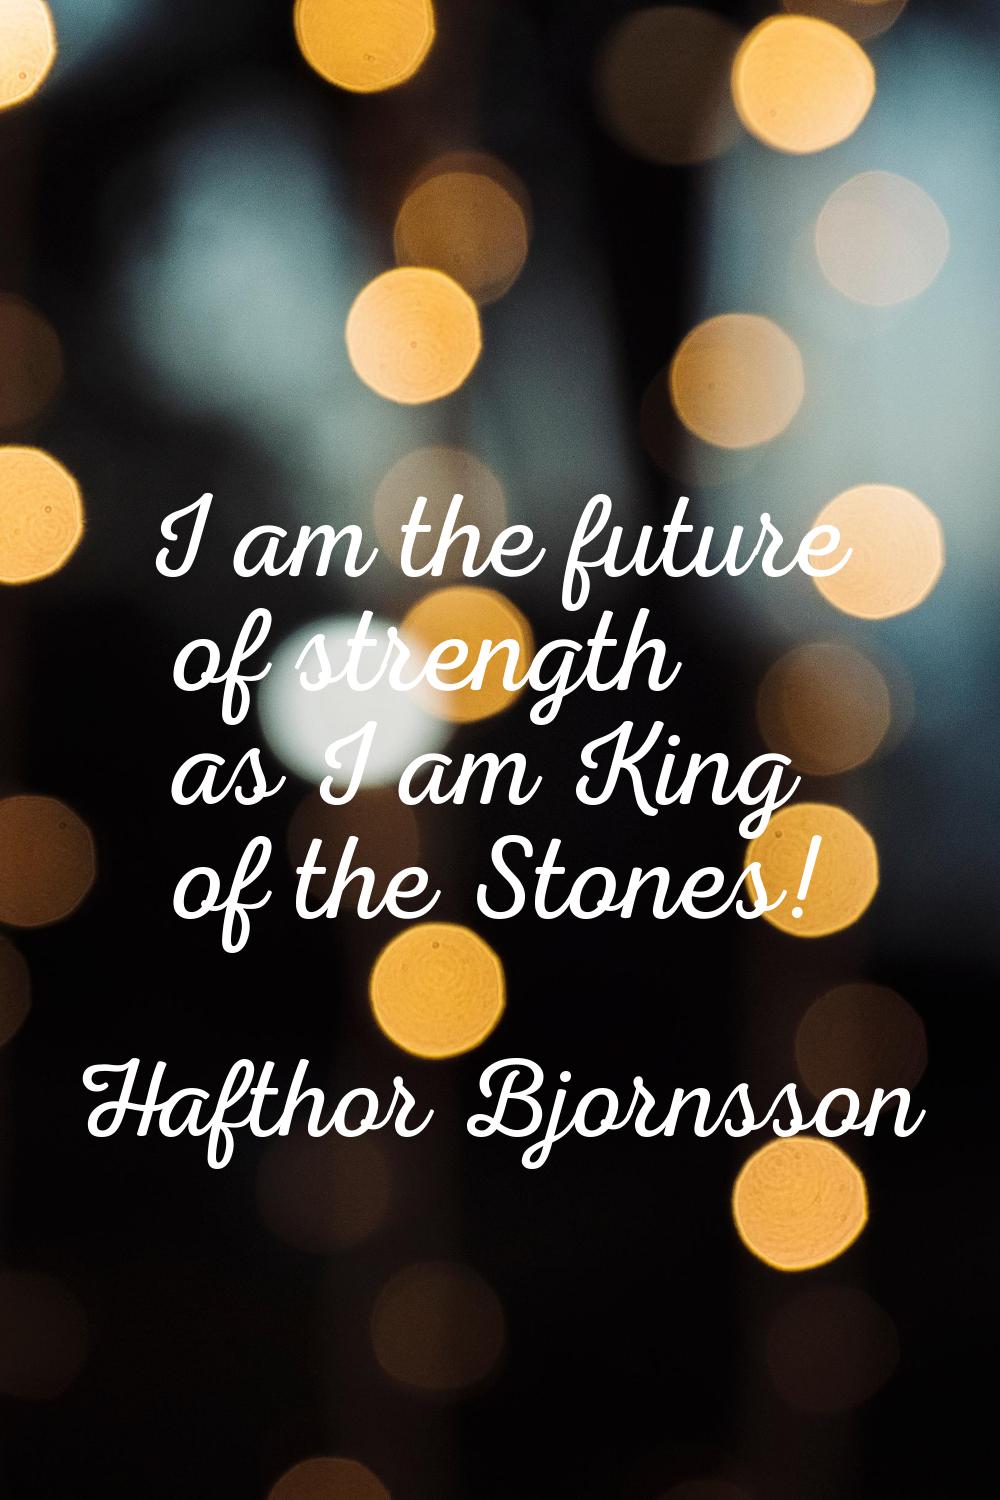 I am the future of strength as I am King of the Stones!